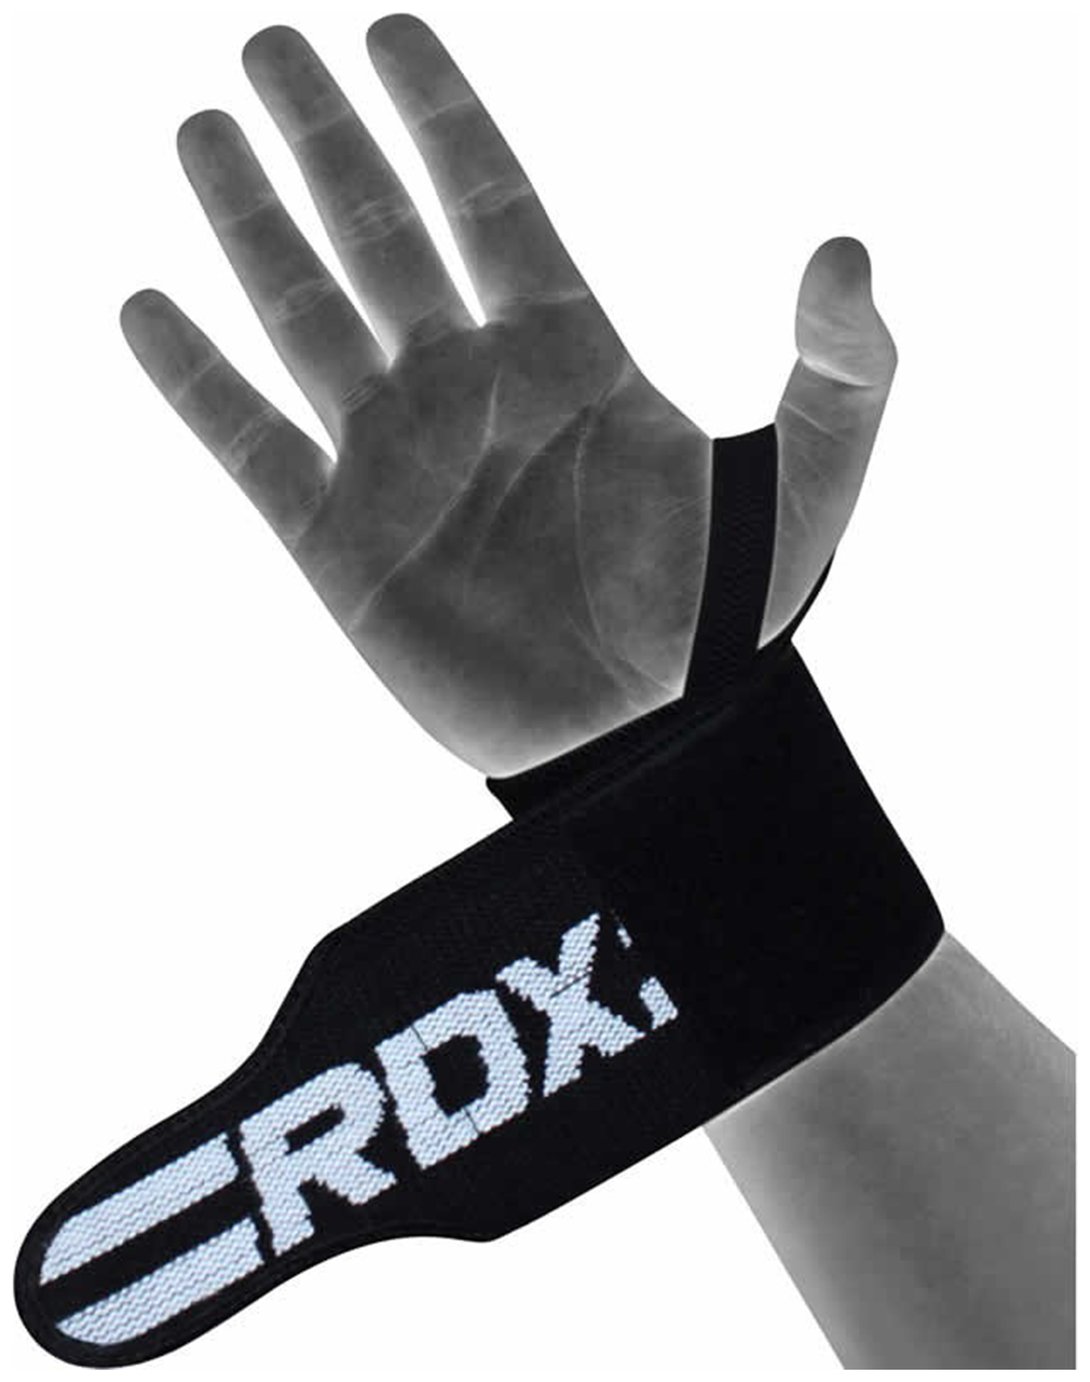 Details about   Wrist Wraps Weight Lifting Training Gym Straps Support Grip Gloves Mark X UK 